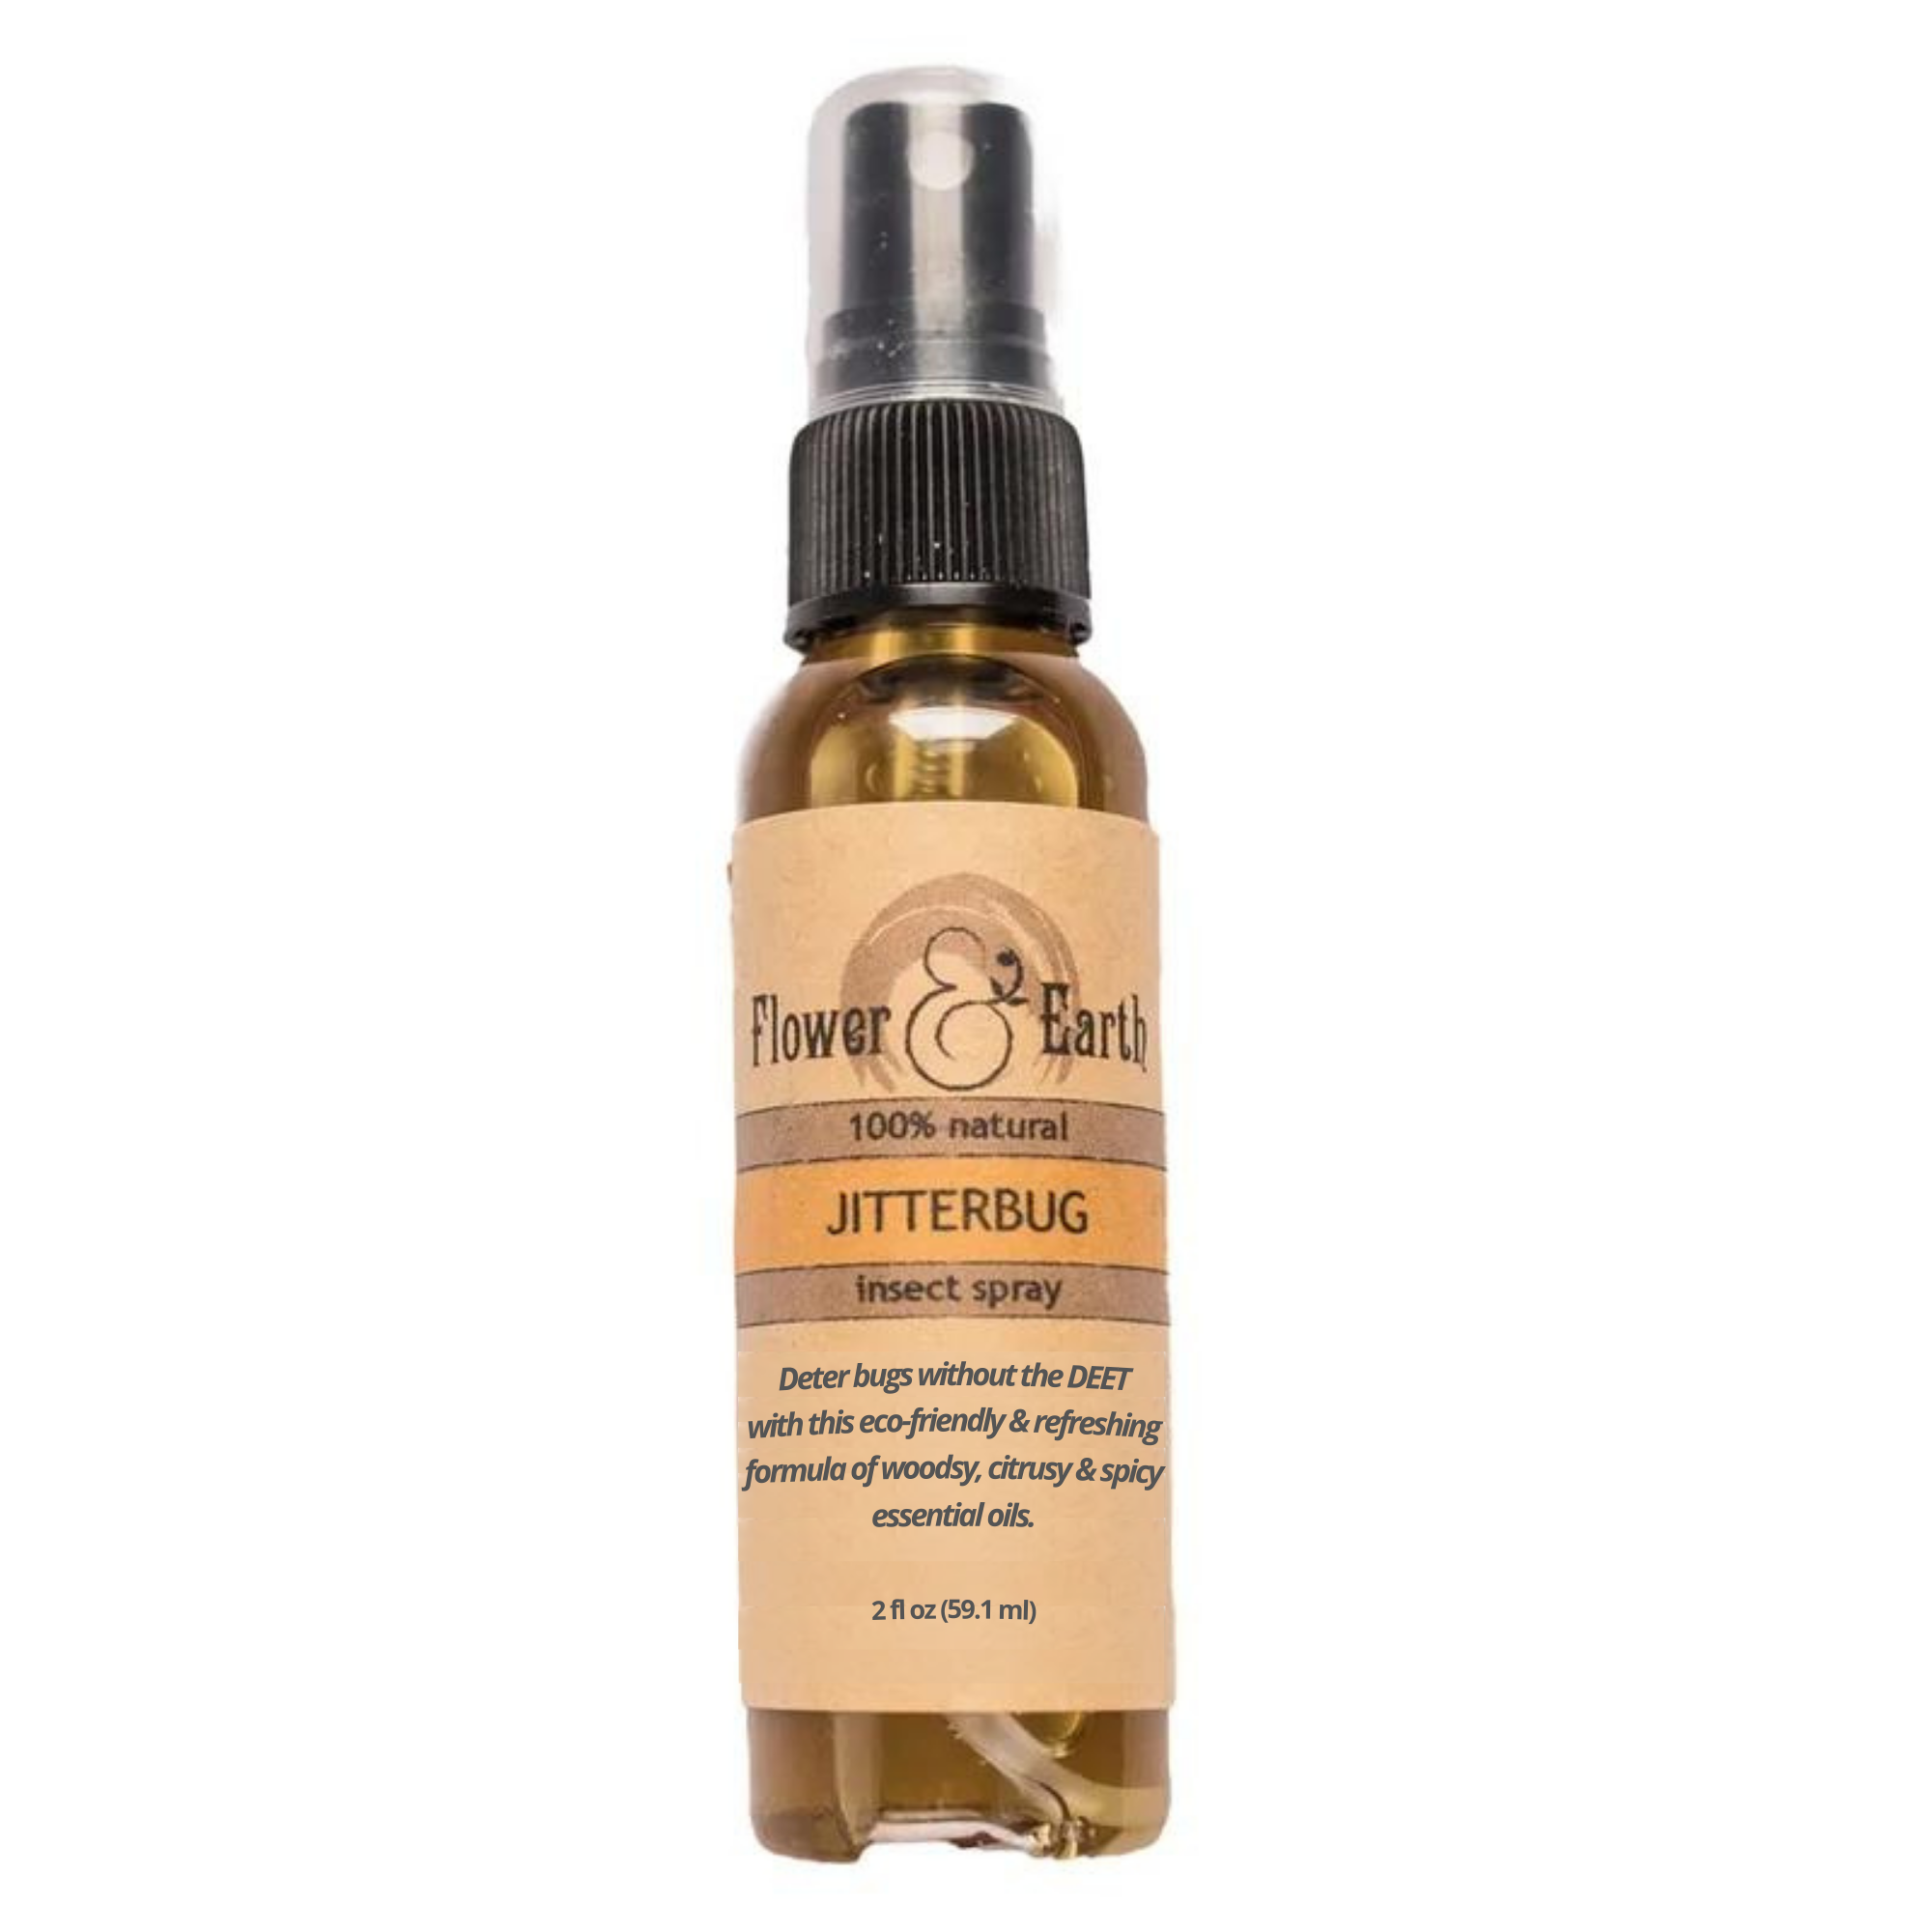 Jitterbug Travel Size Bug Spray, Natural Insect Spray, Essential